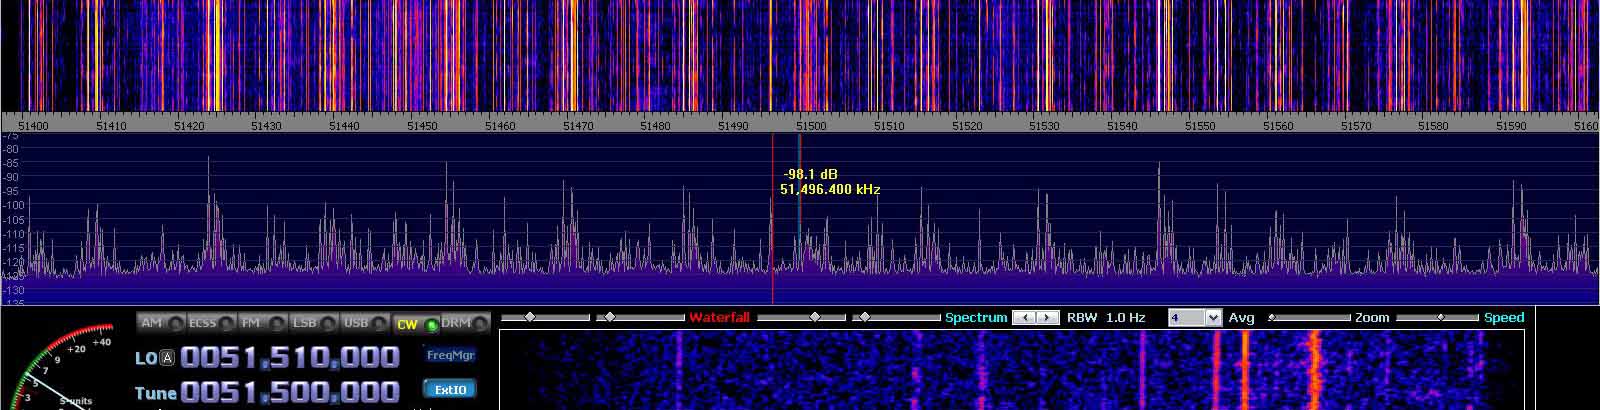 2014-07-04 51.500 MHz +- 100 kHz - Strong Es - 4-el dipole array with ends to St P - (c) OH7HJ.JPG